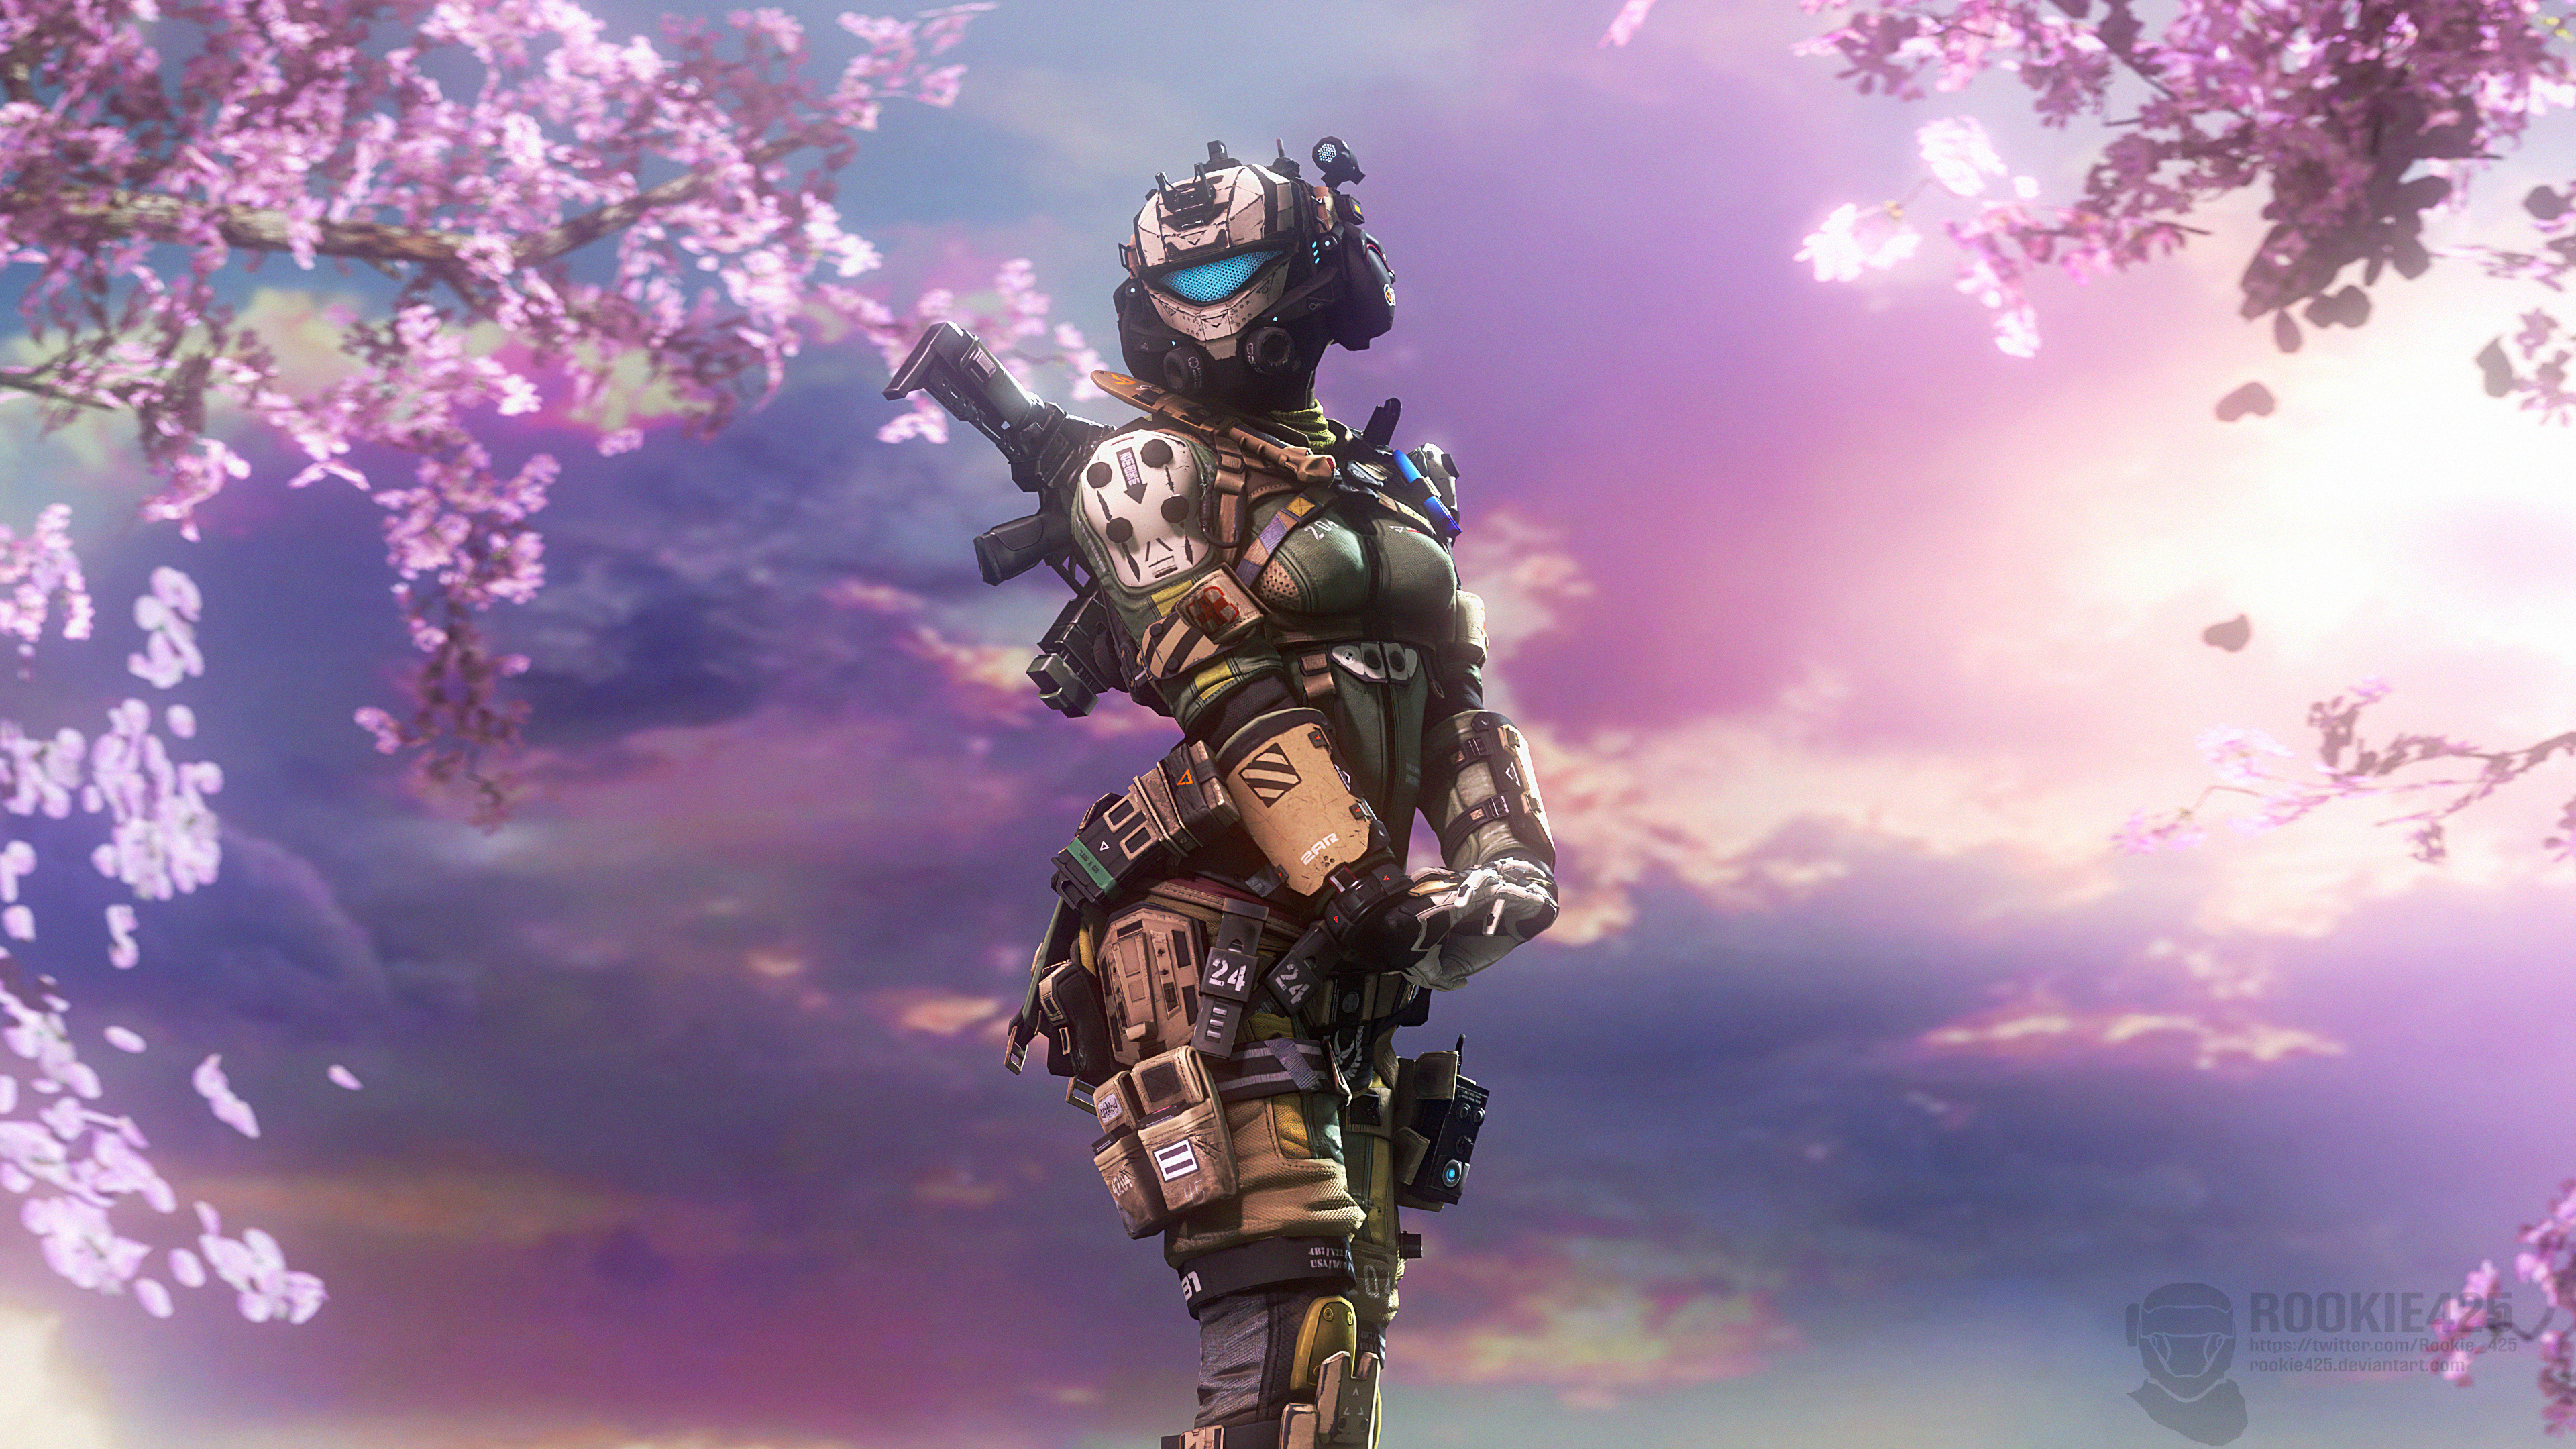 Become One Titanfall 2 4K Ultra HD Mobile Wallpaper